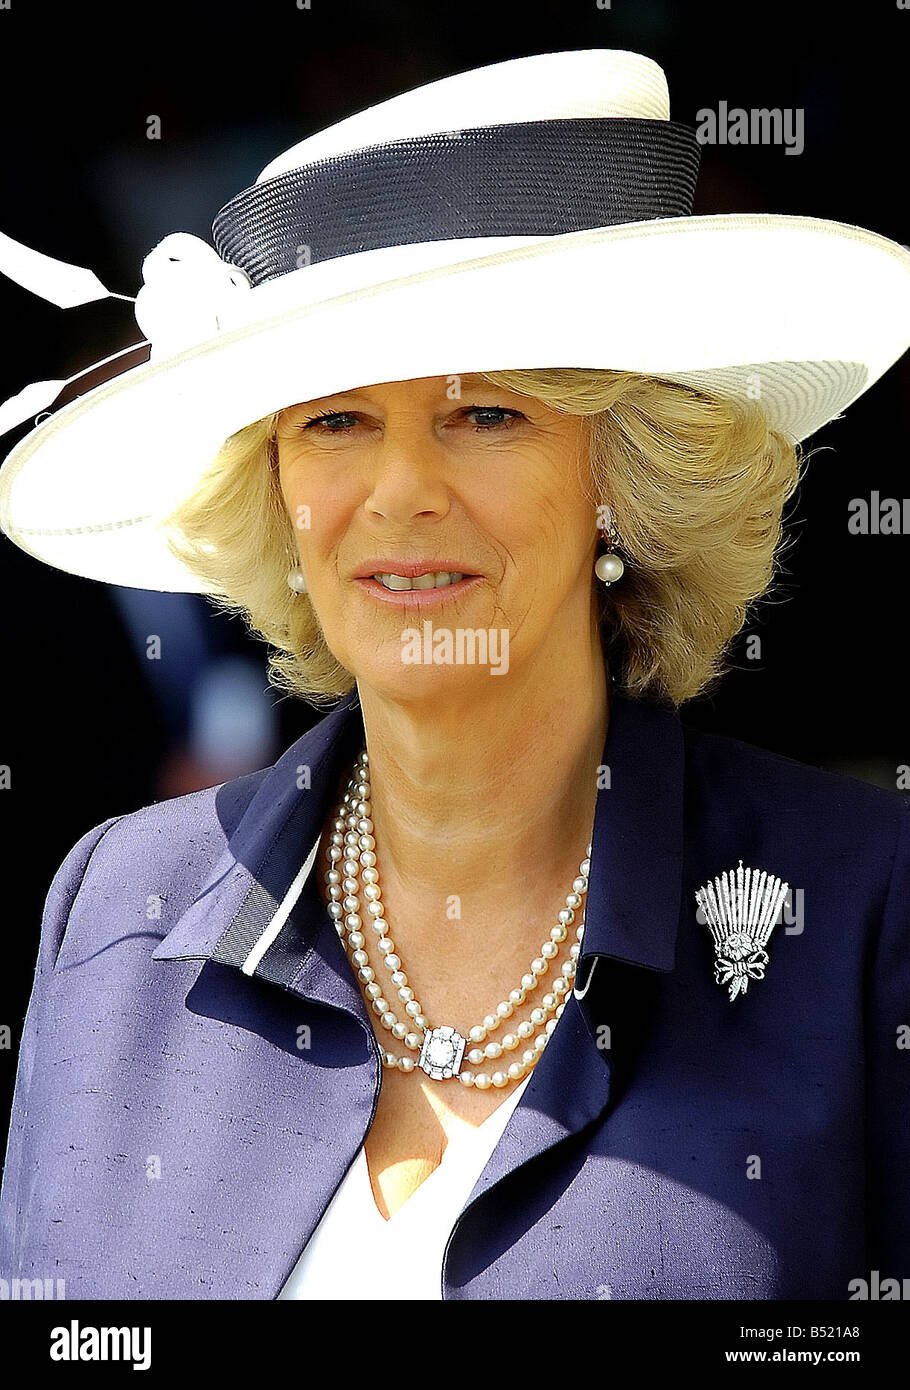 camilla-duchess-of-cornwall-at-the-naming-and-roll-out-ceremony-for-B521A8.jpg